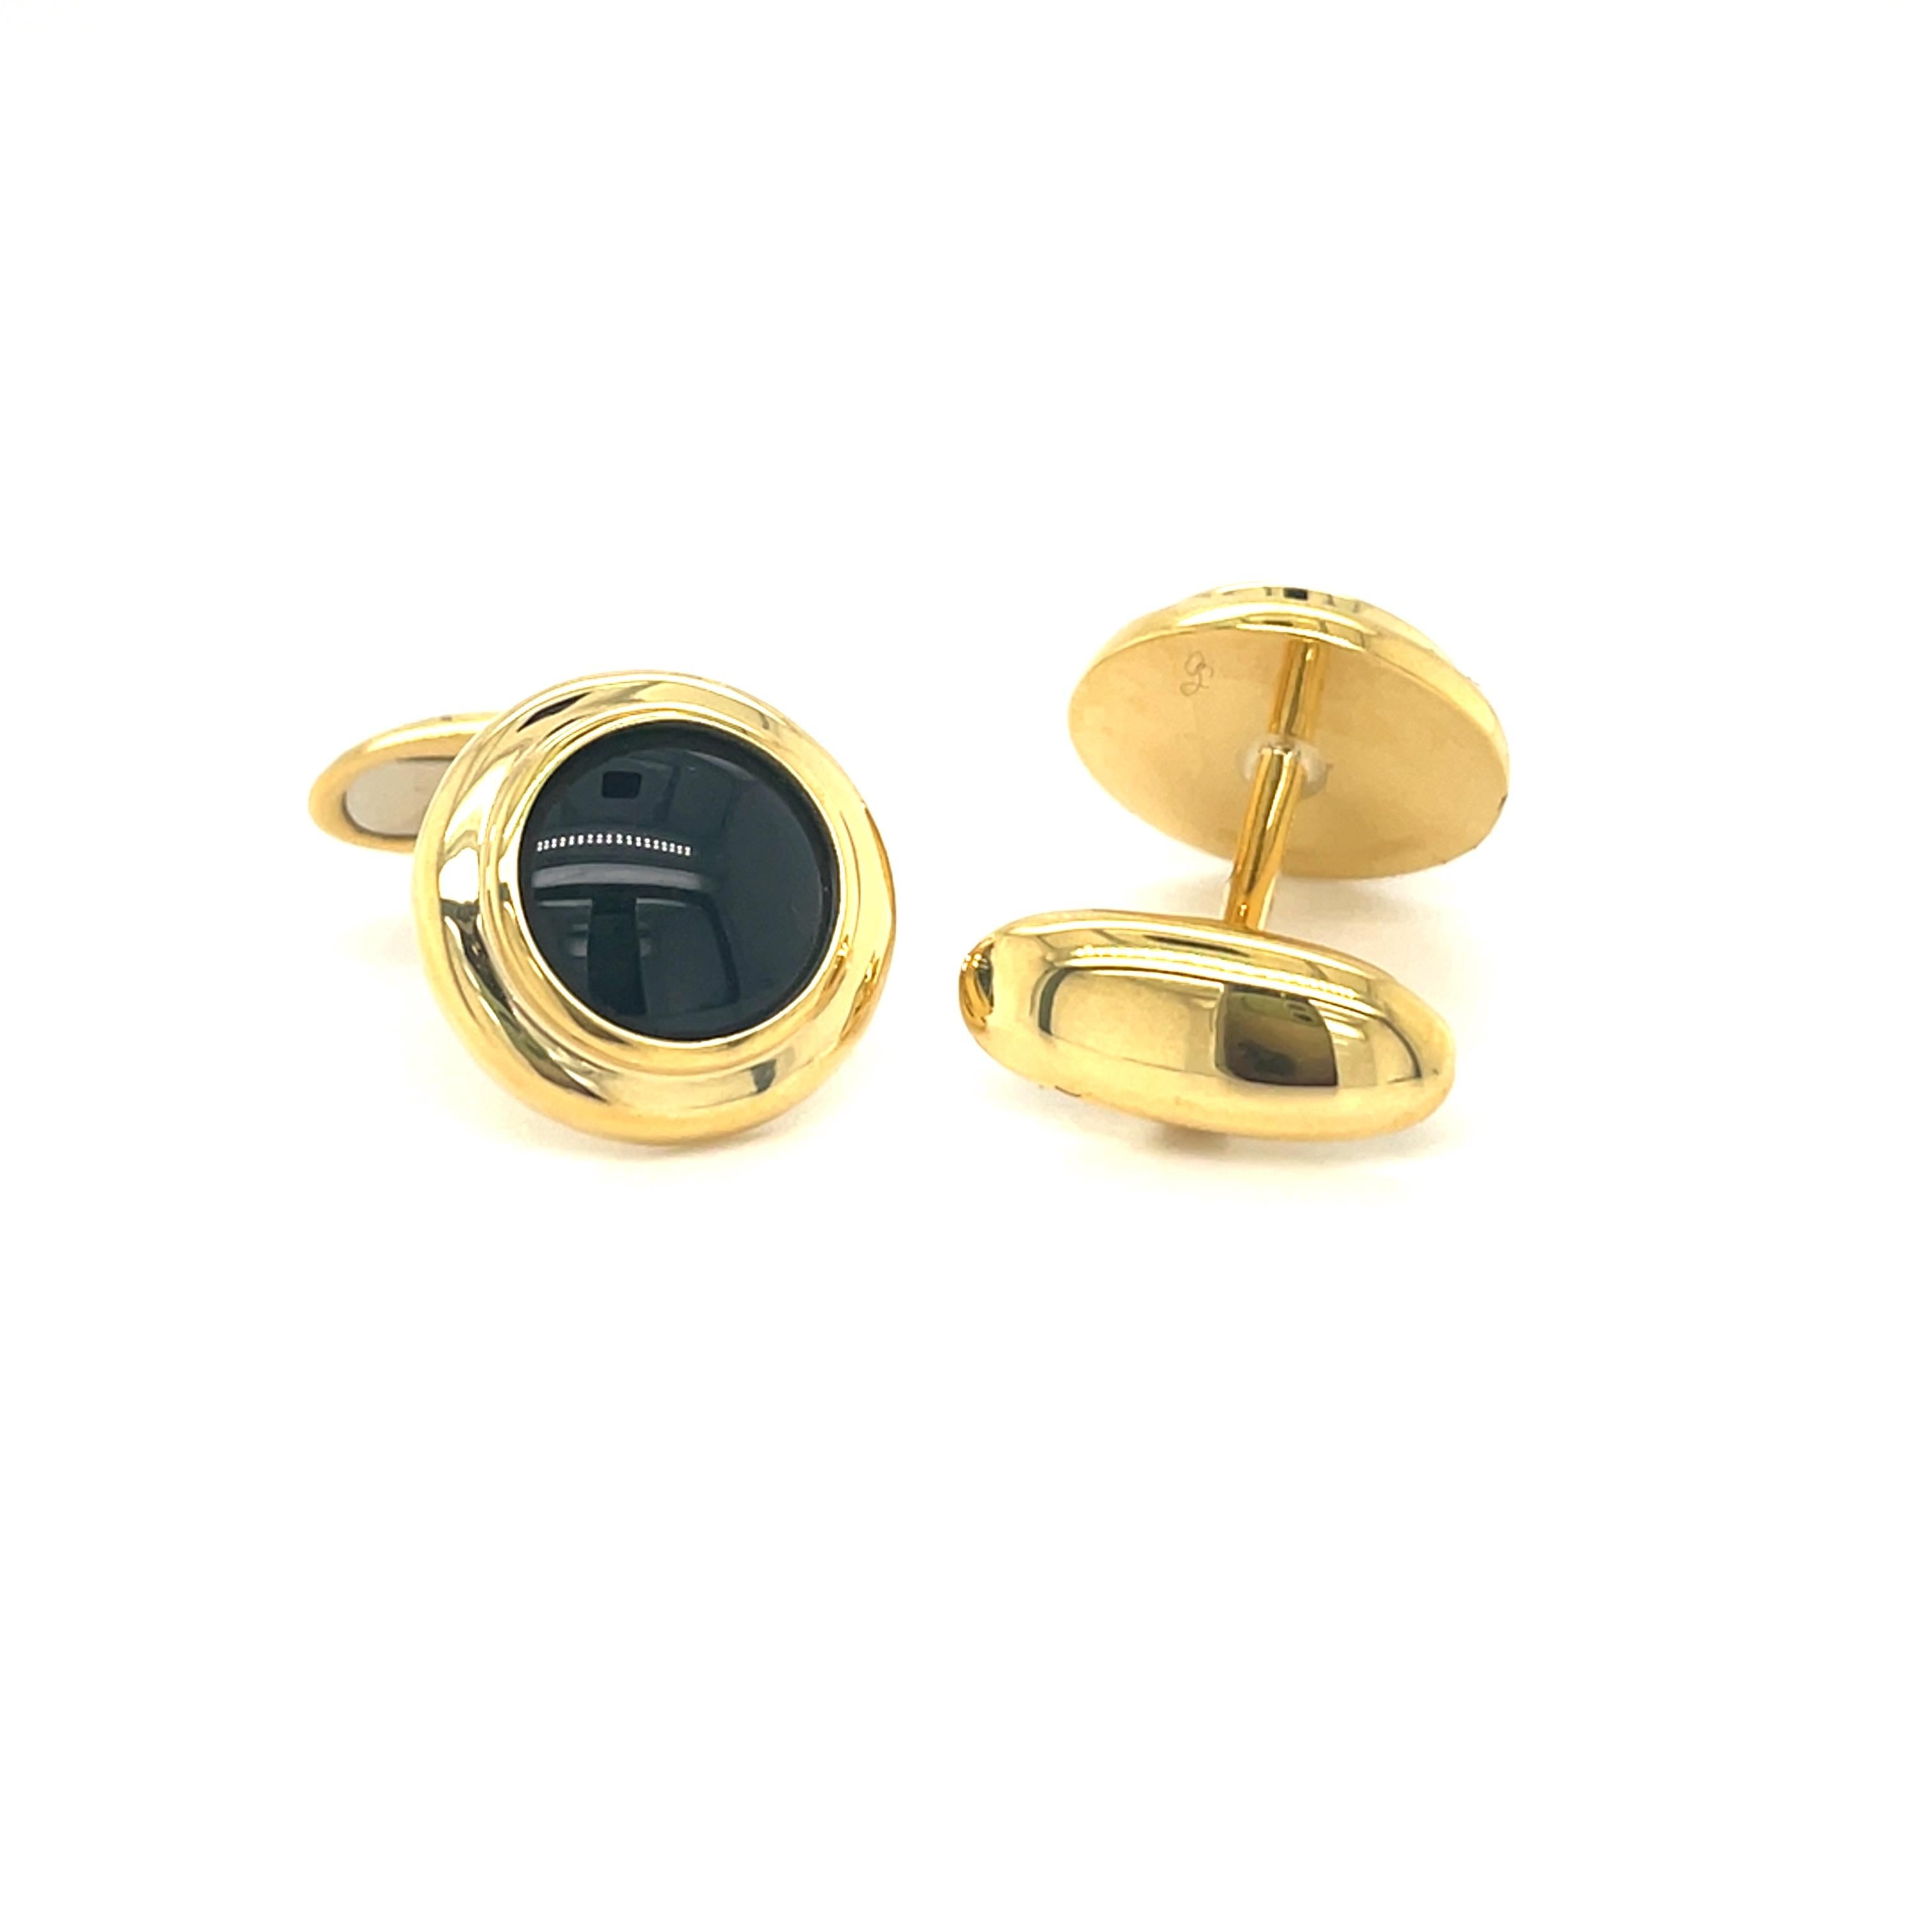 These yellow gold cufflinks are from Men's Collection. These cufflinks are decorated with Yellow gold and onyx 5.50 ct. The dimensions of the cufflinks are 1.5cm. These cufflinks are a perfect upgrade to every special occasion.
These classic